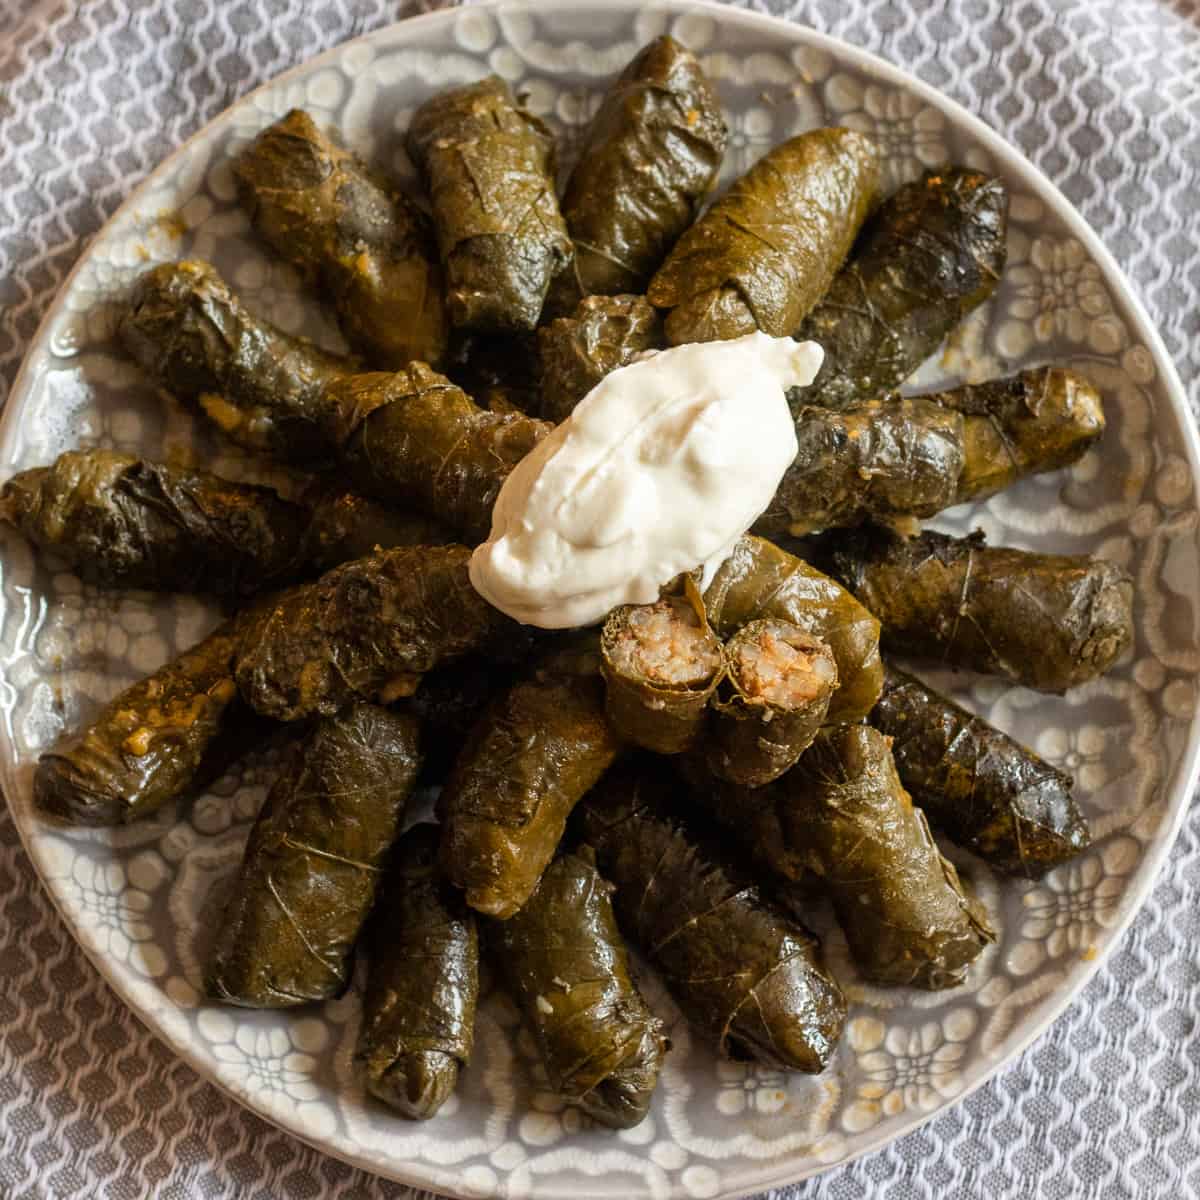 Meat stuffed grape leaves (dolmas)served with a dollop of yoghurt